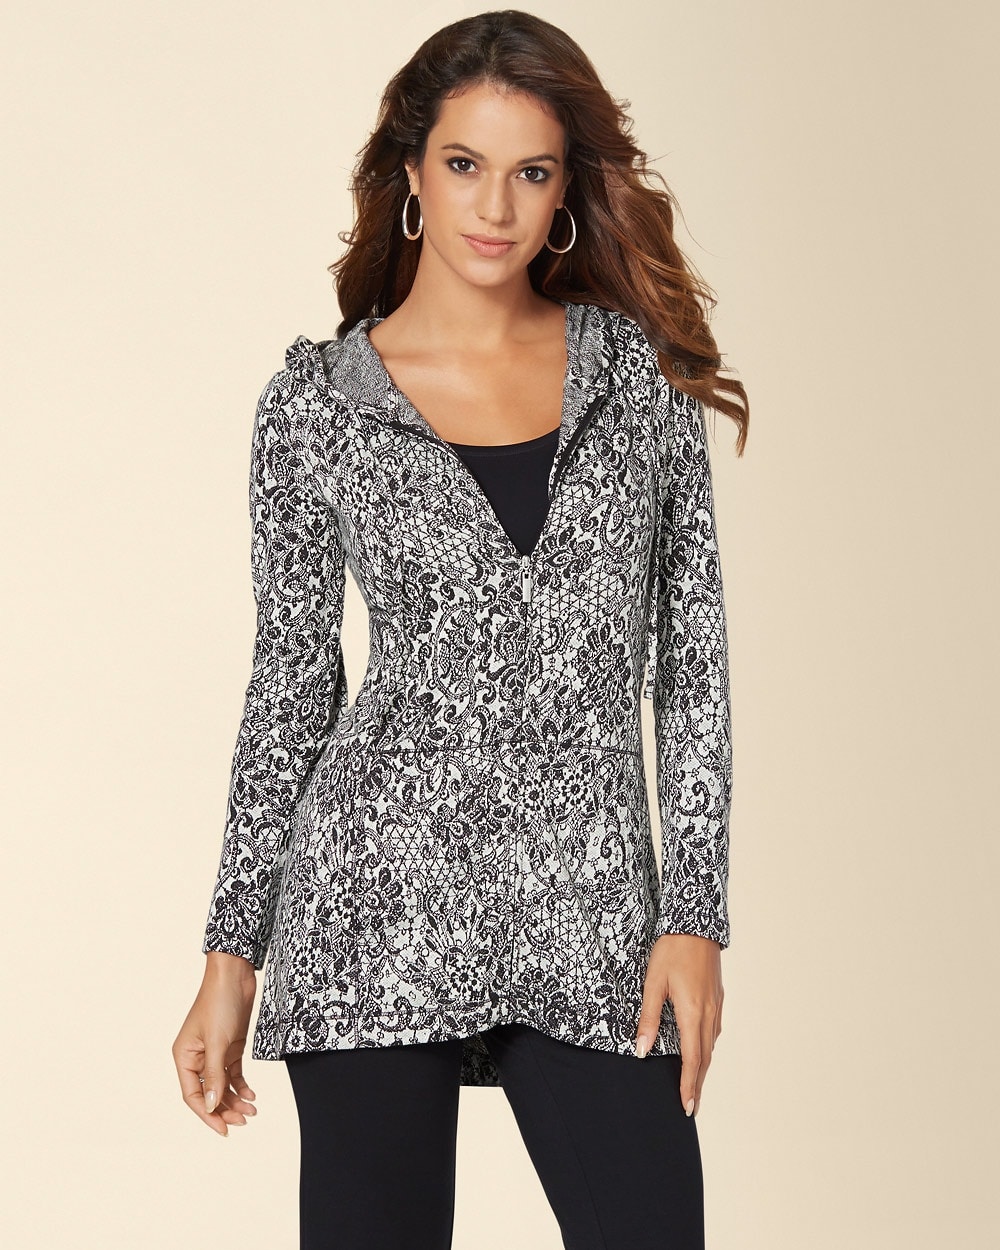 French Terry Jacquard Swing Hoodie Opulent Lace Jacquard